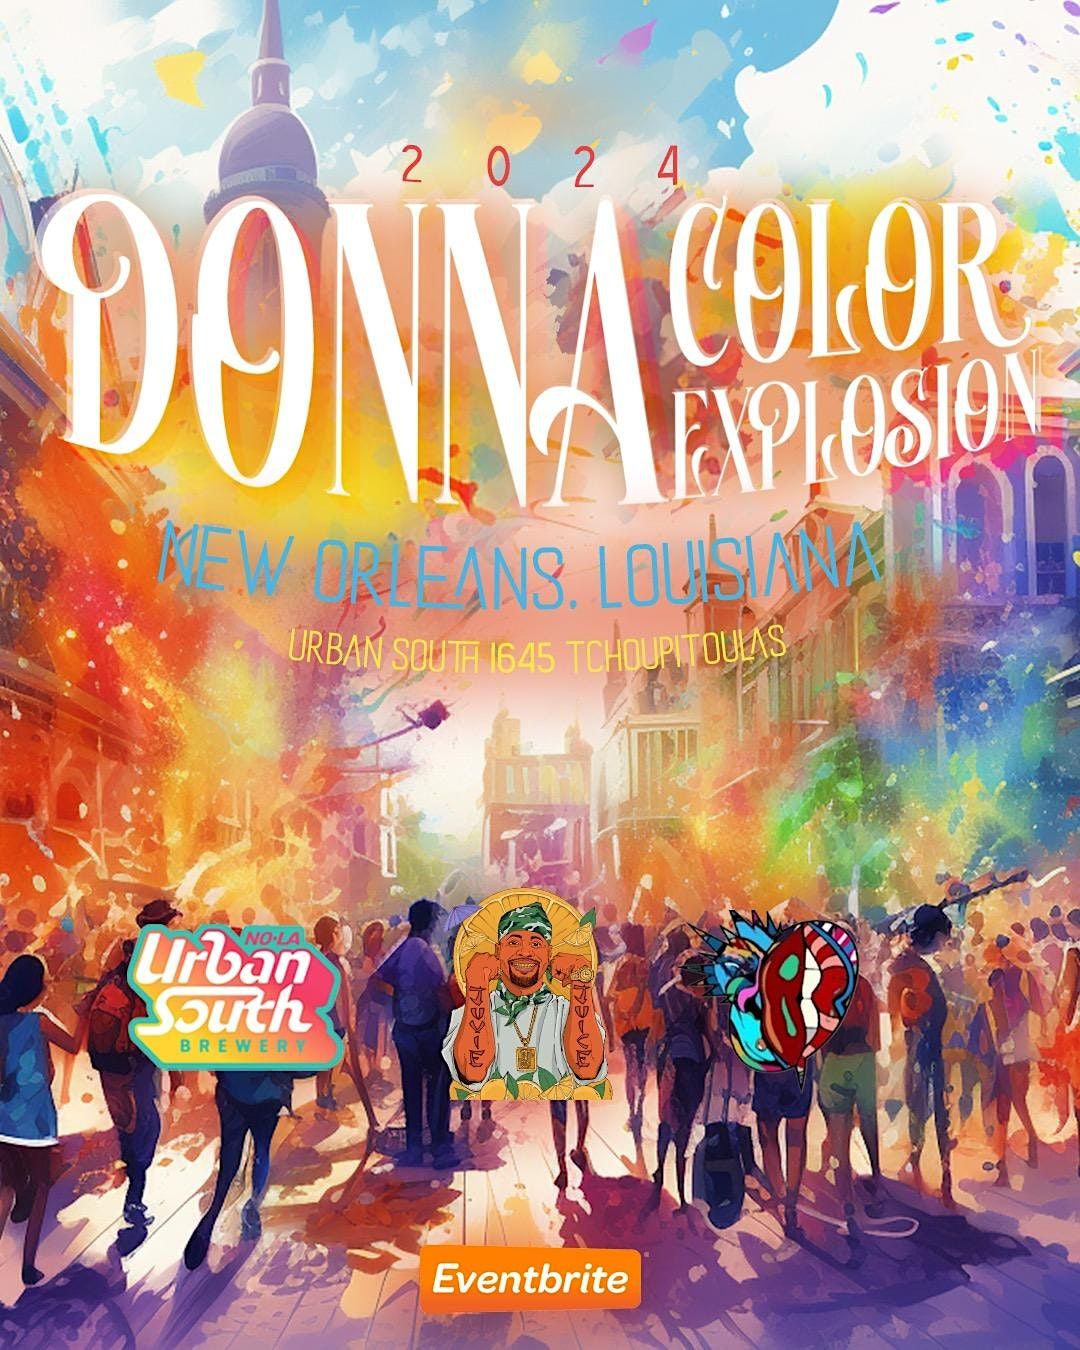 The Donna Color Explosion